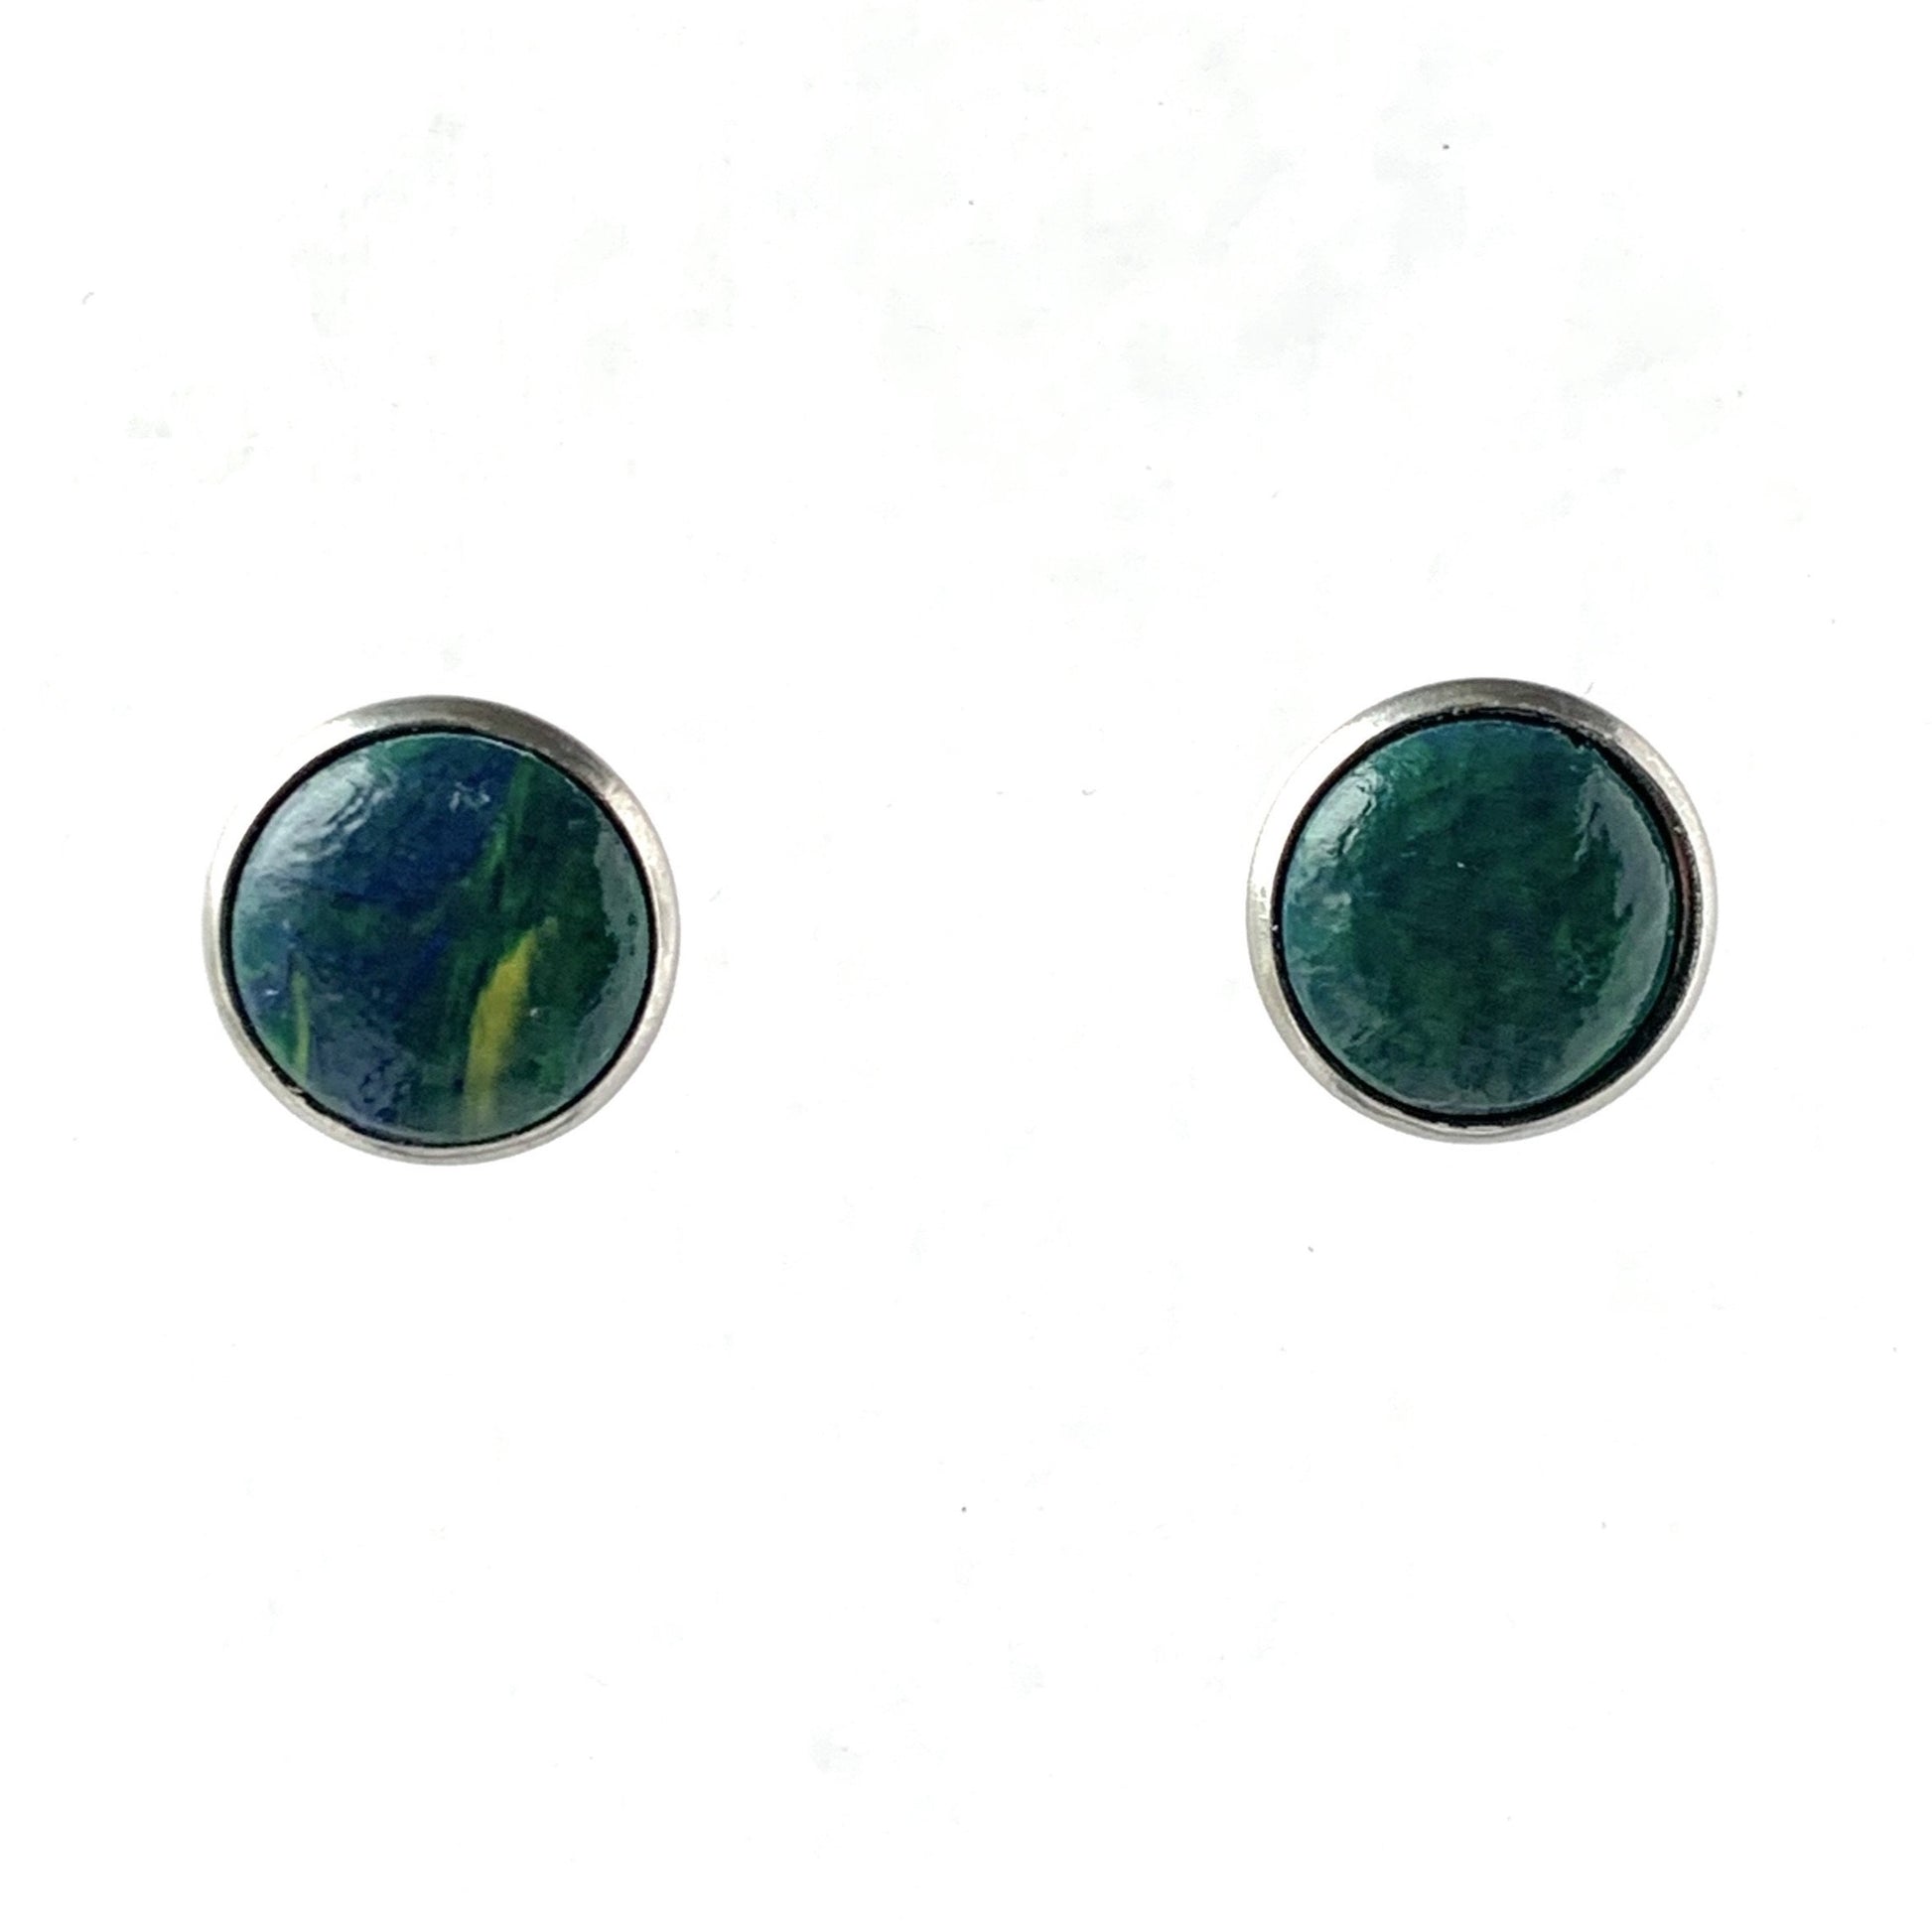 Small Green Studs Handmade from recycled plastic